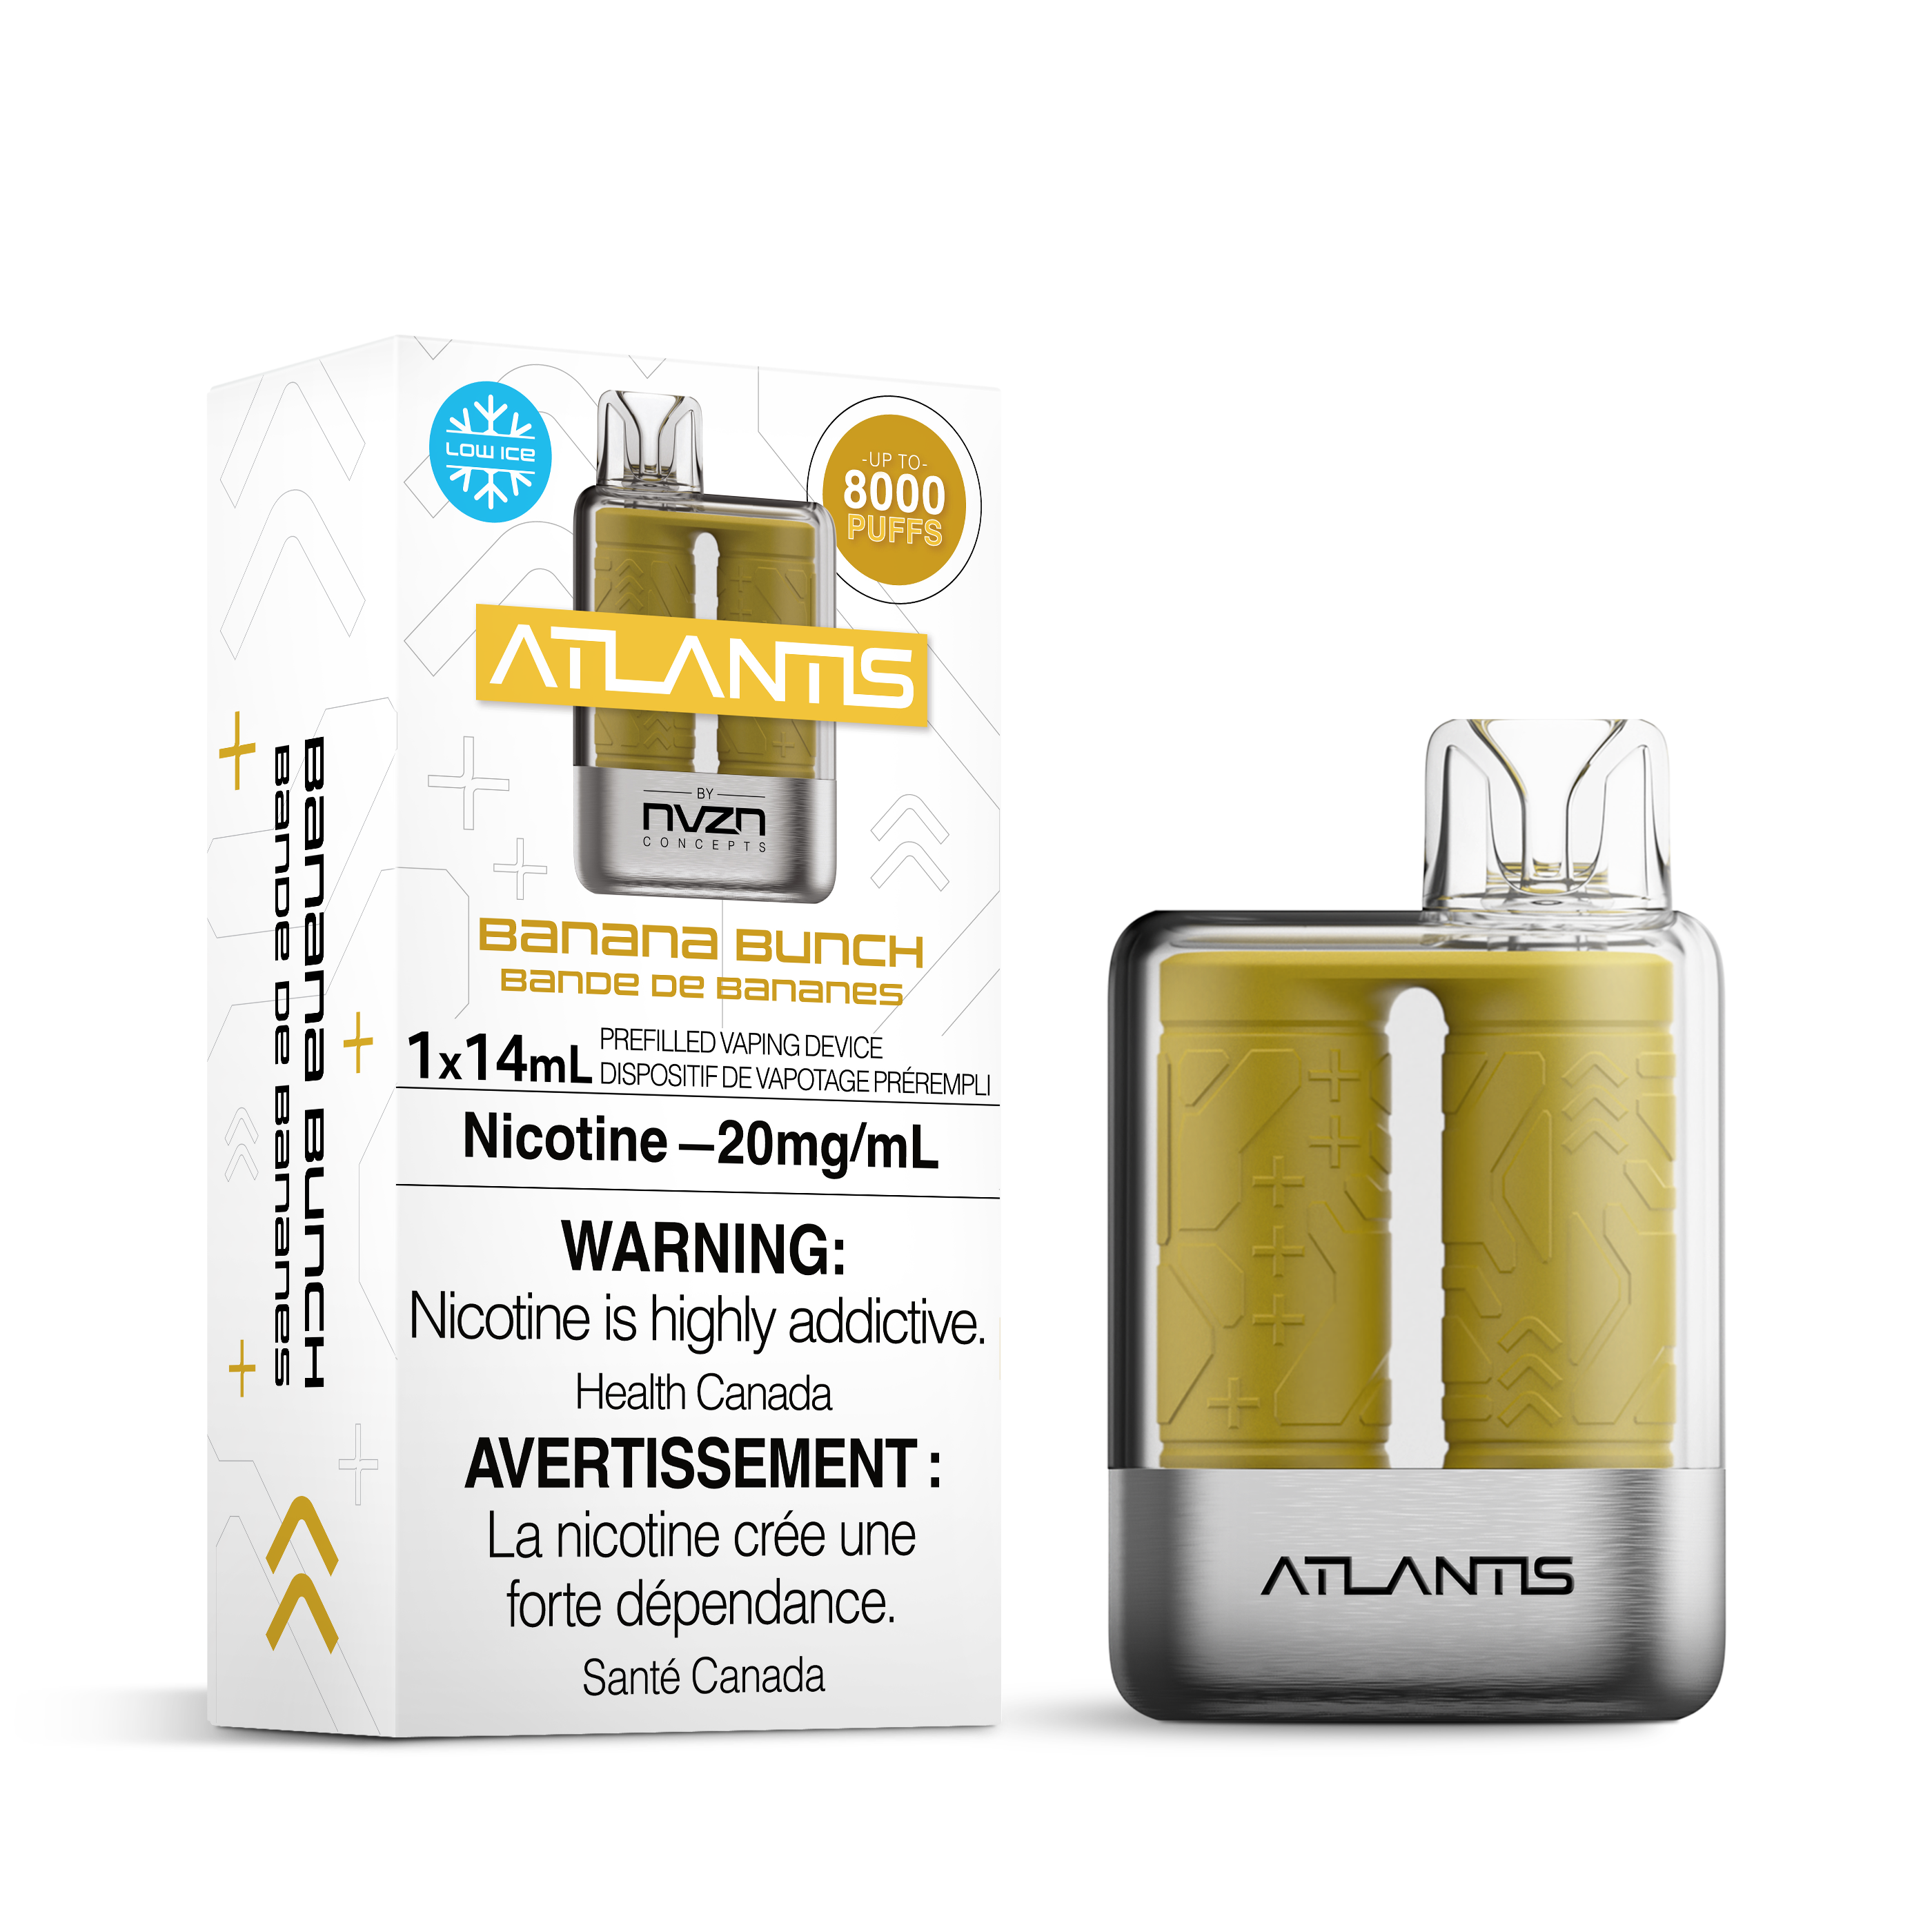 NVZN - Atlantis 8000 - Rechargeable Disposable - 8000 Puffs